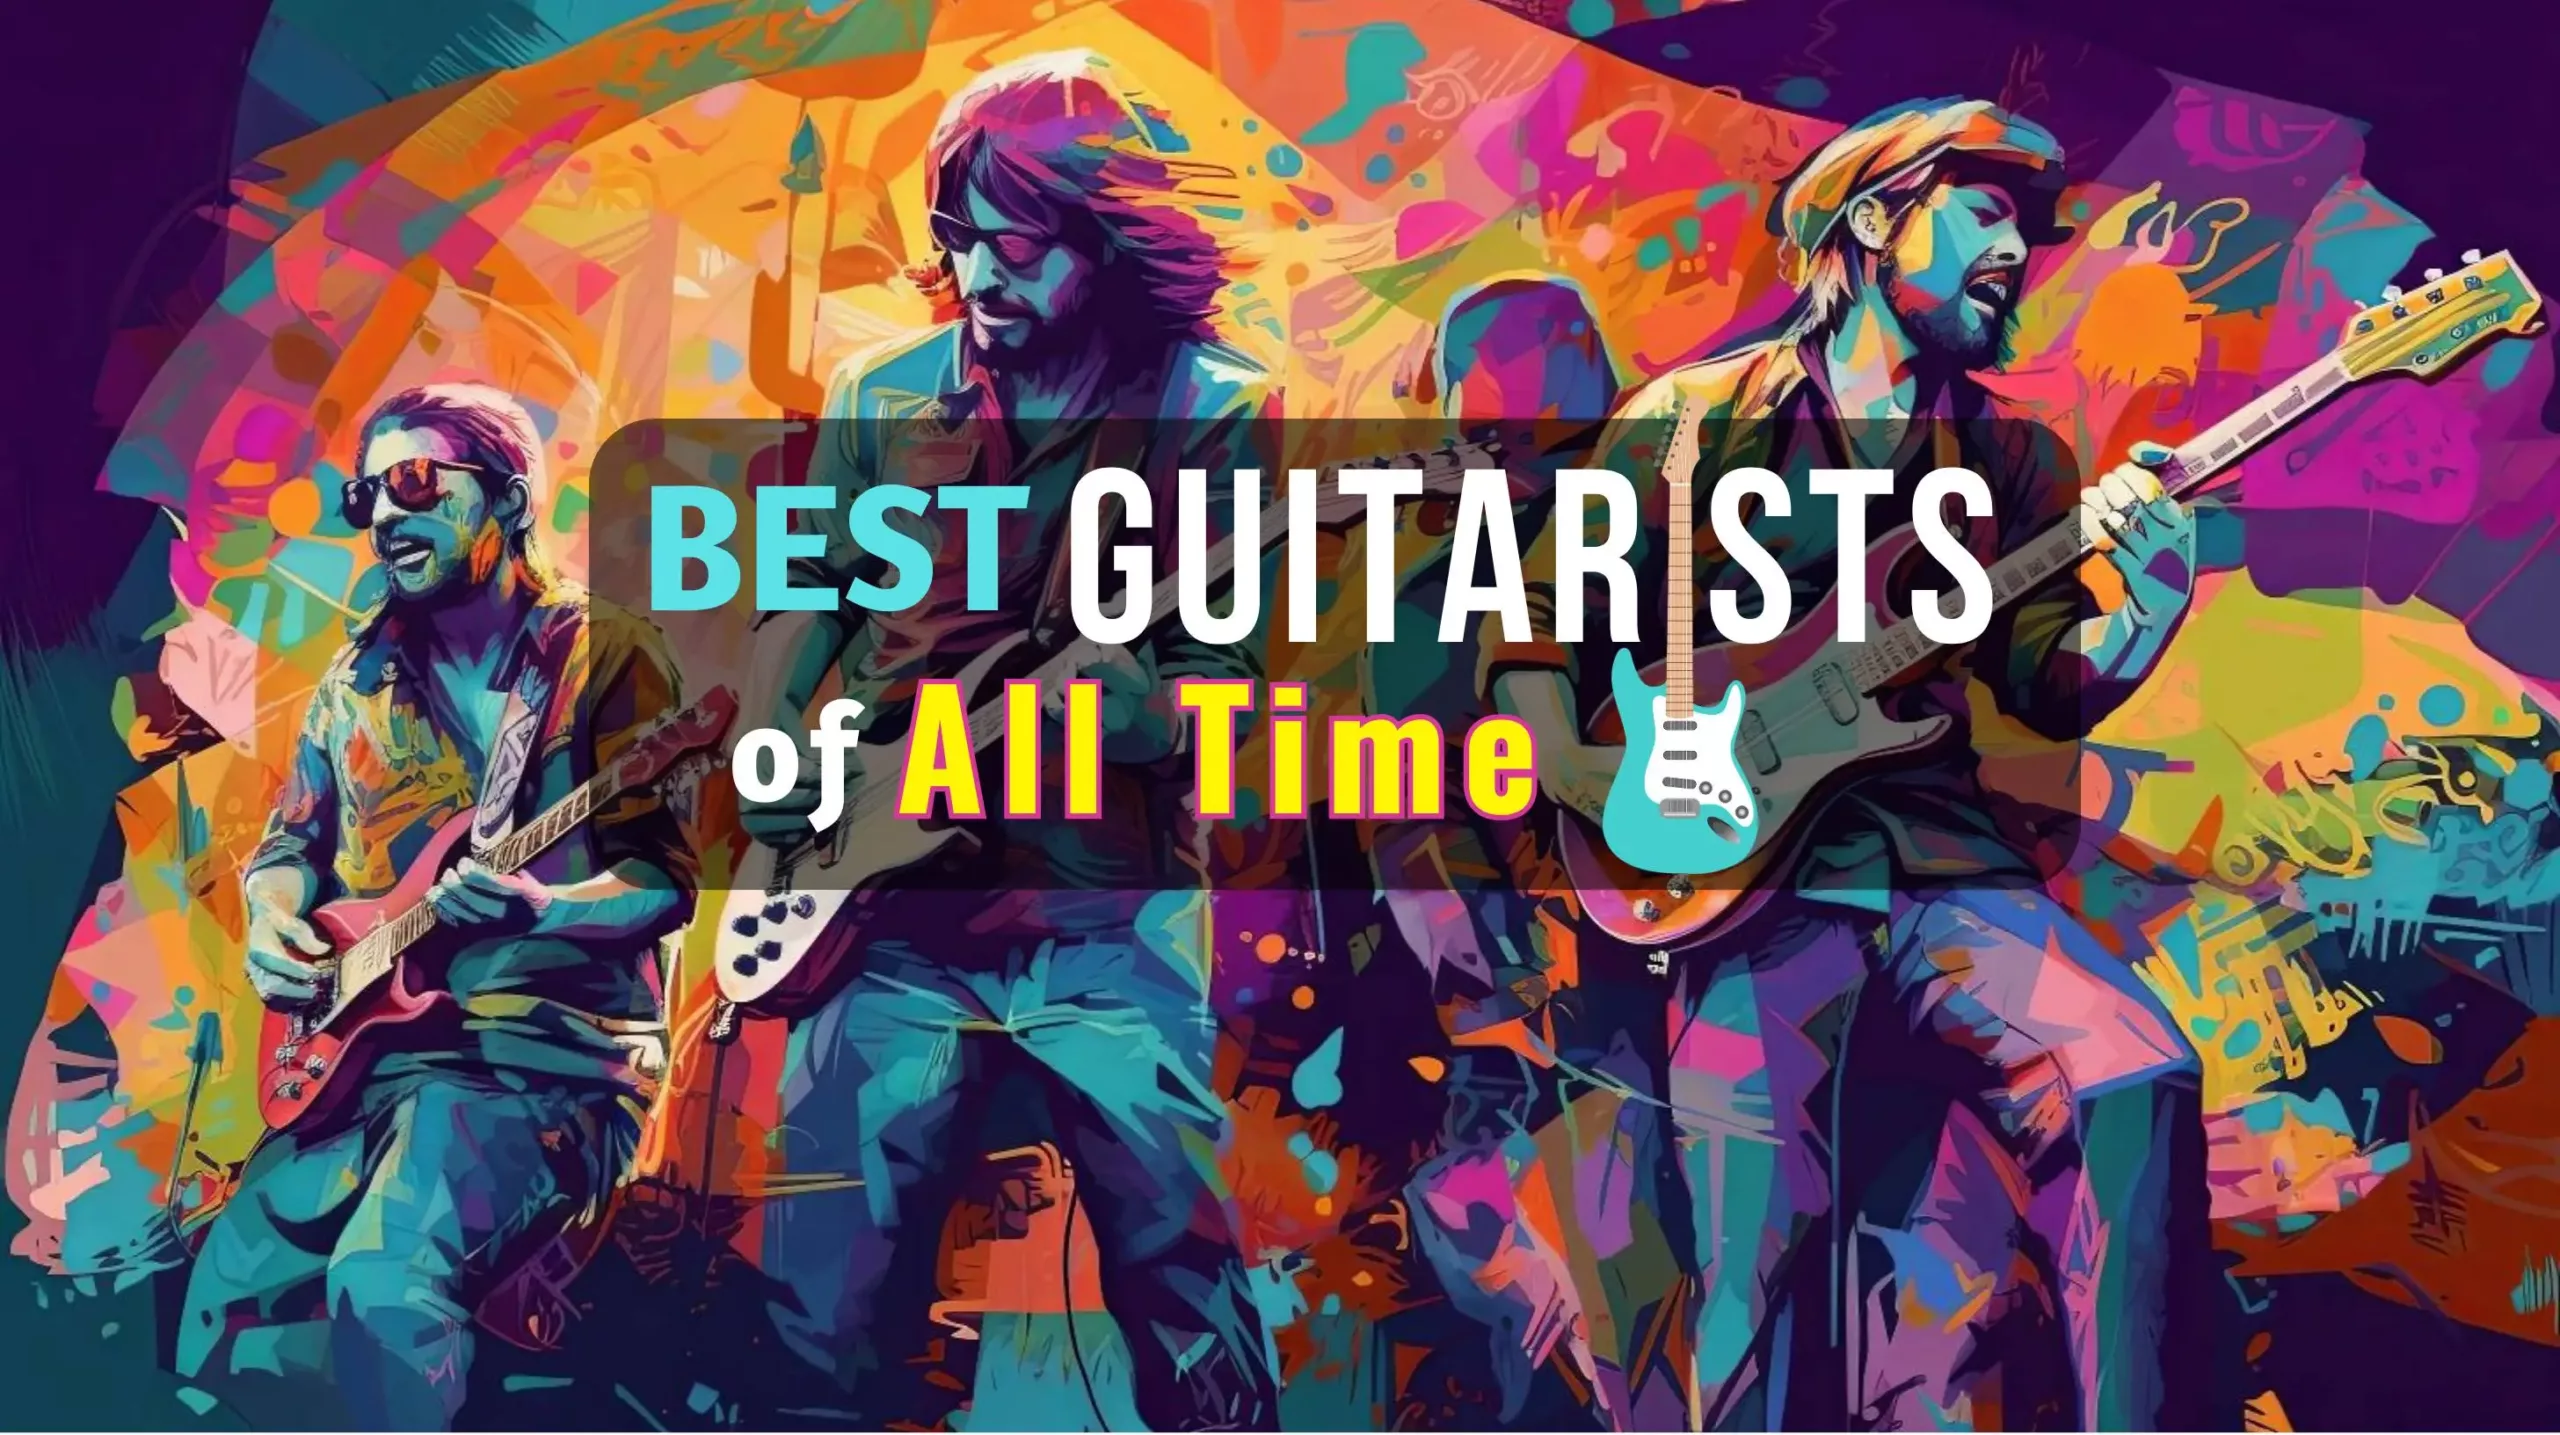 The Best Guitarists of All Time